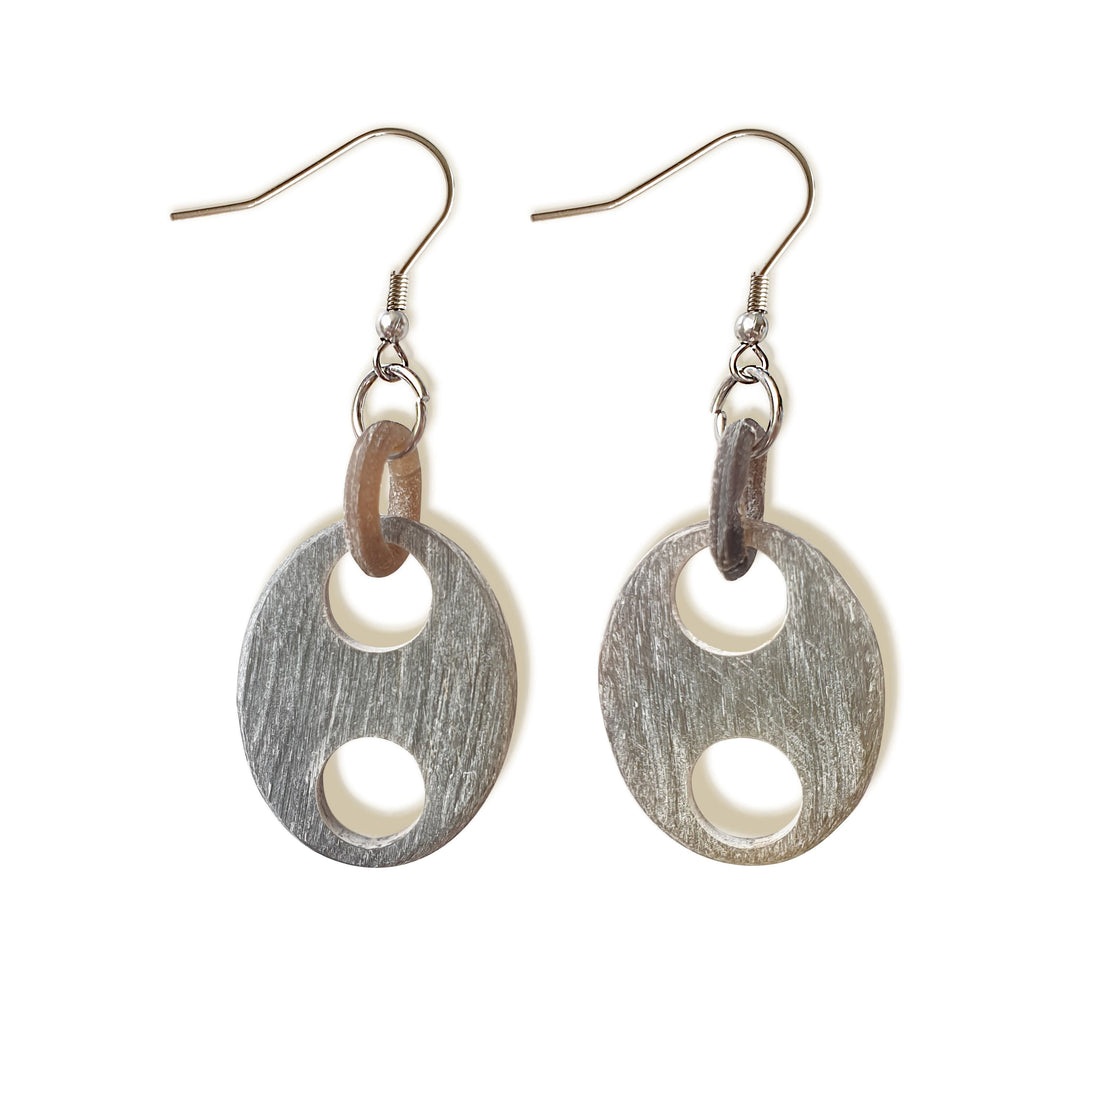 Evil Eye Dangle Earrings are handmade with light grey color under the efforts of craftsman in the natural light